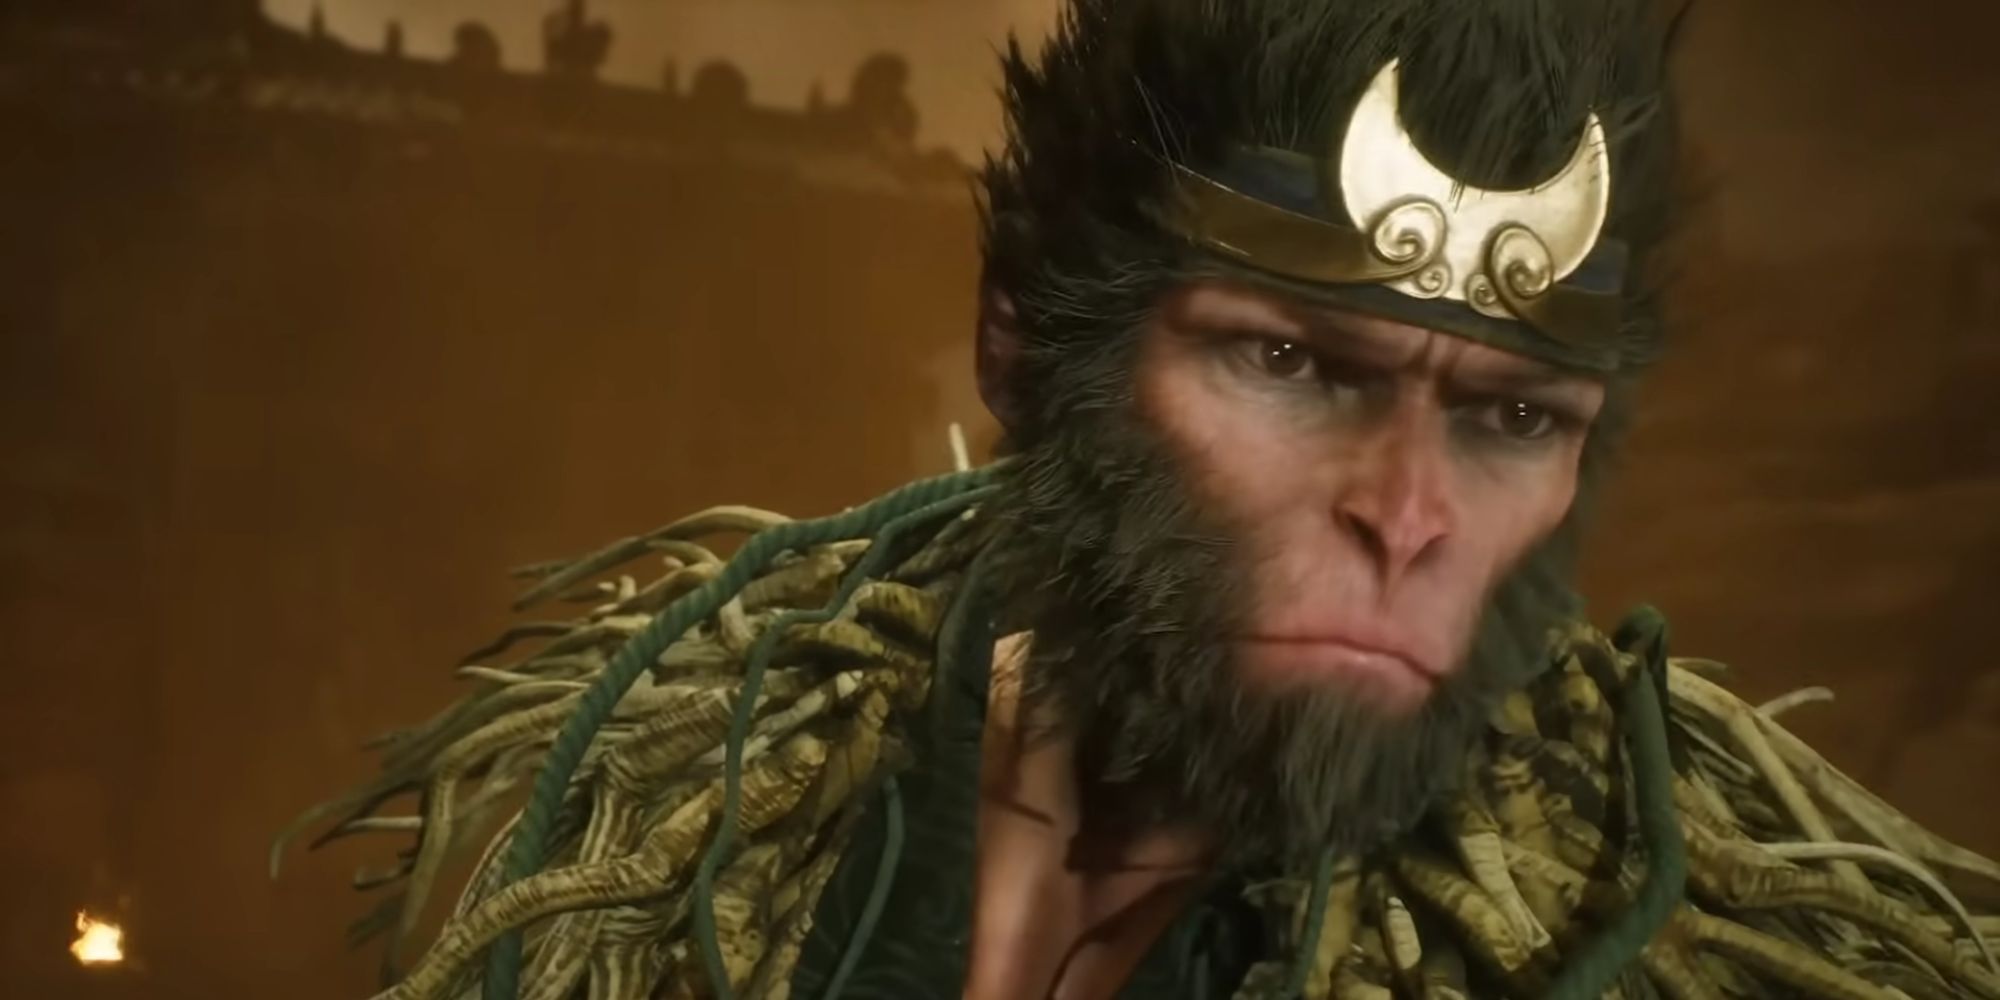 Wukong in the Opening Night Live trailer for Black Myth: Wukong.